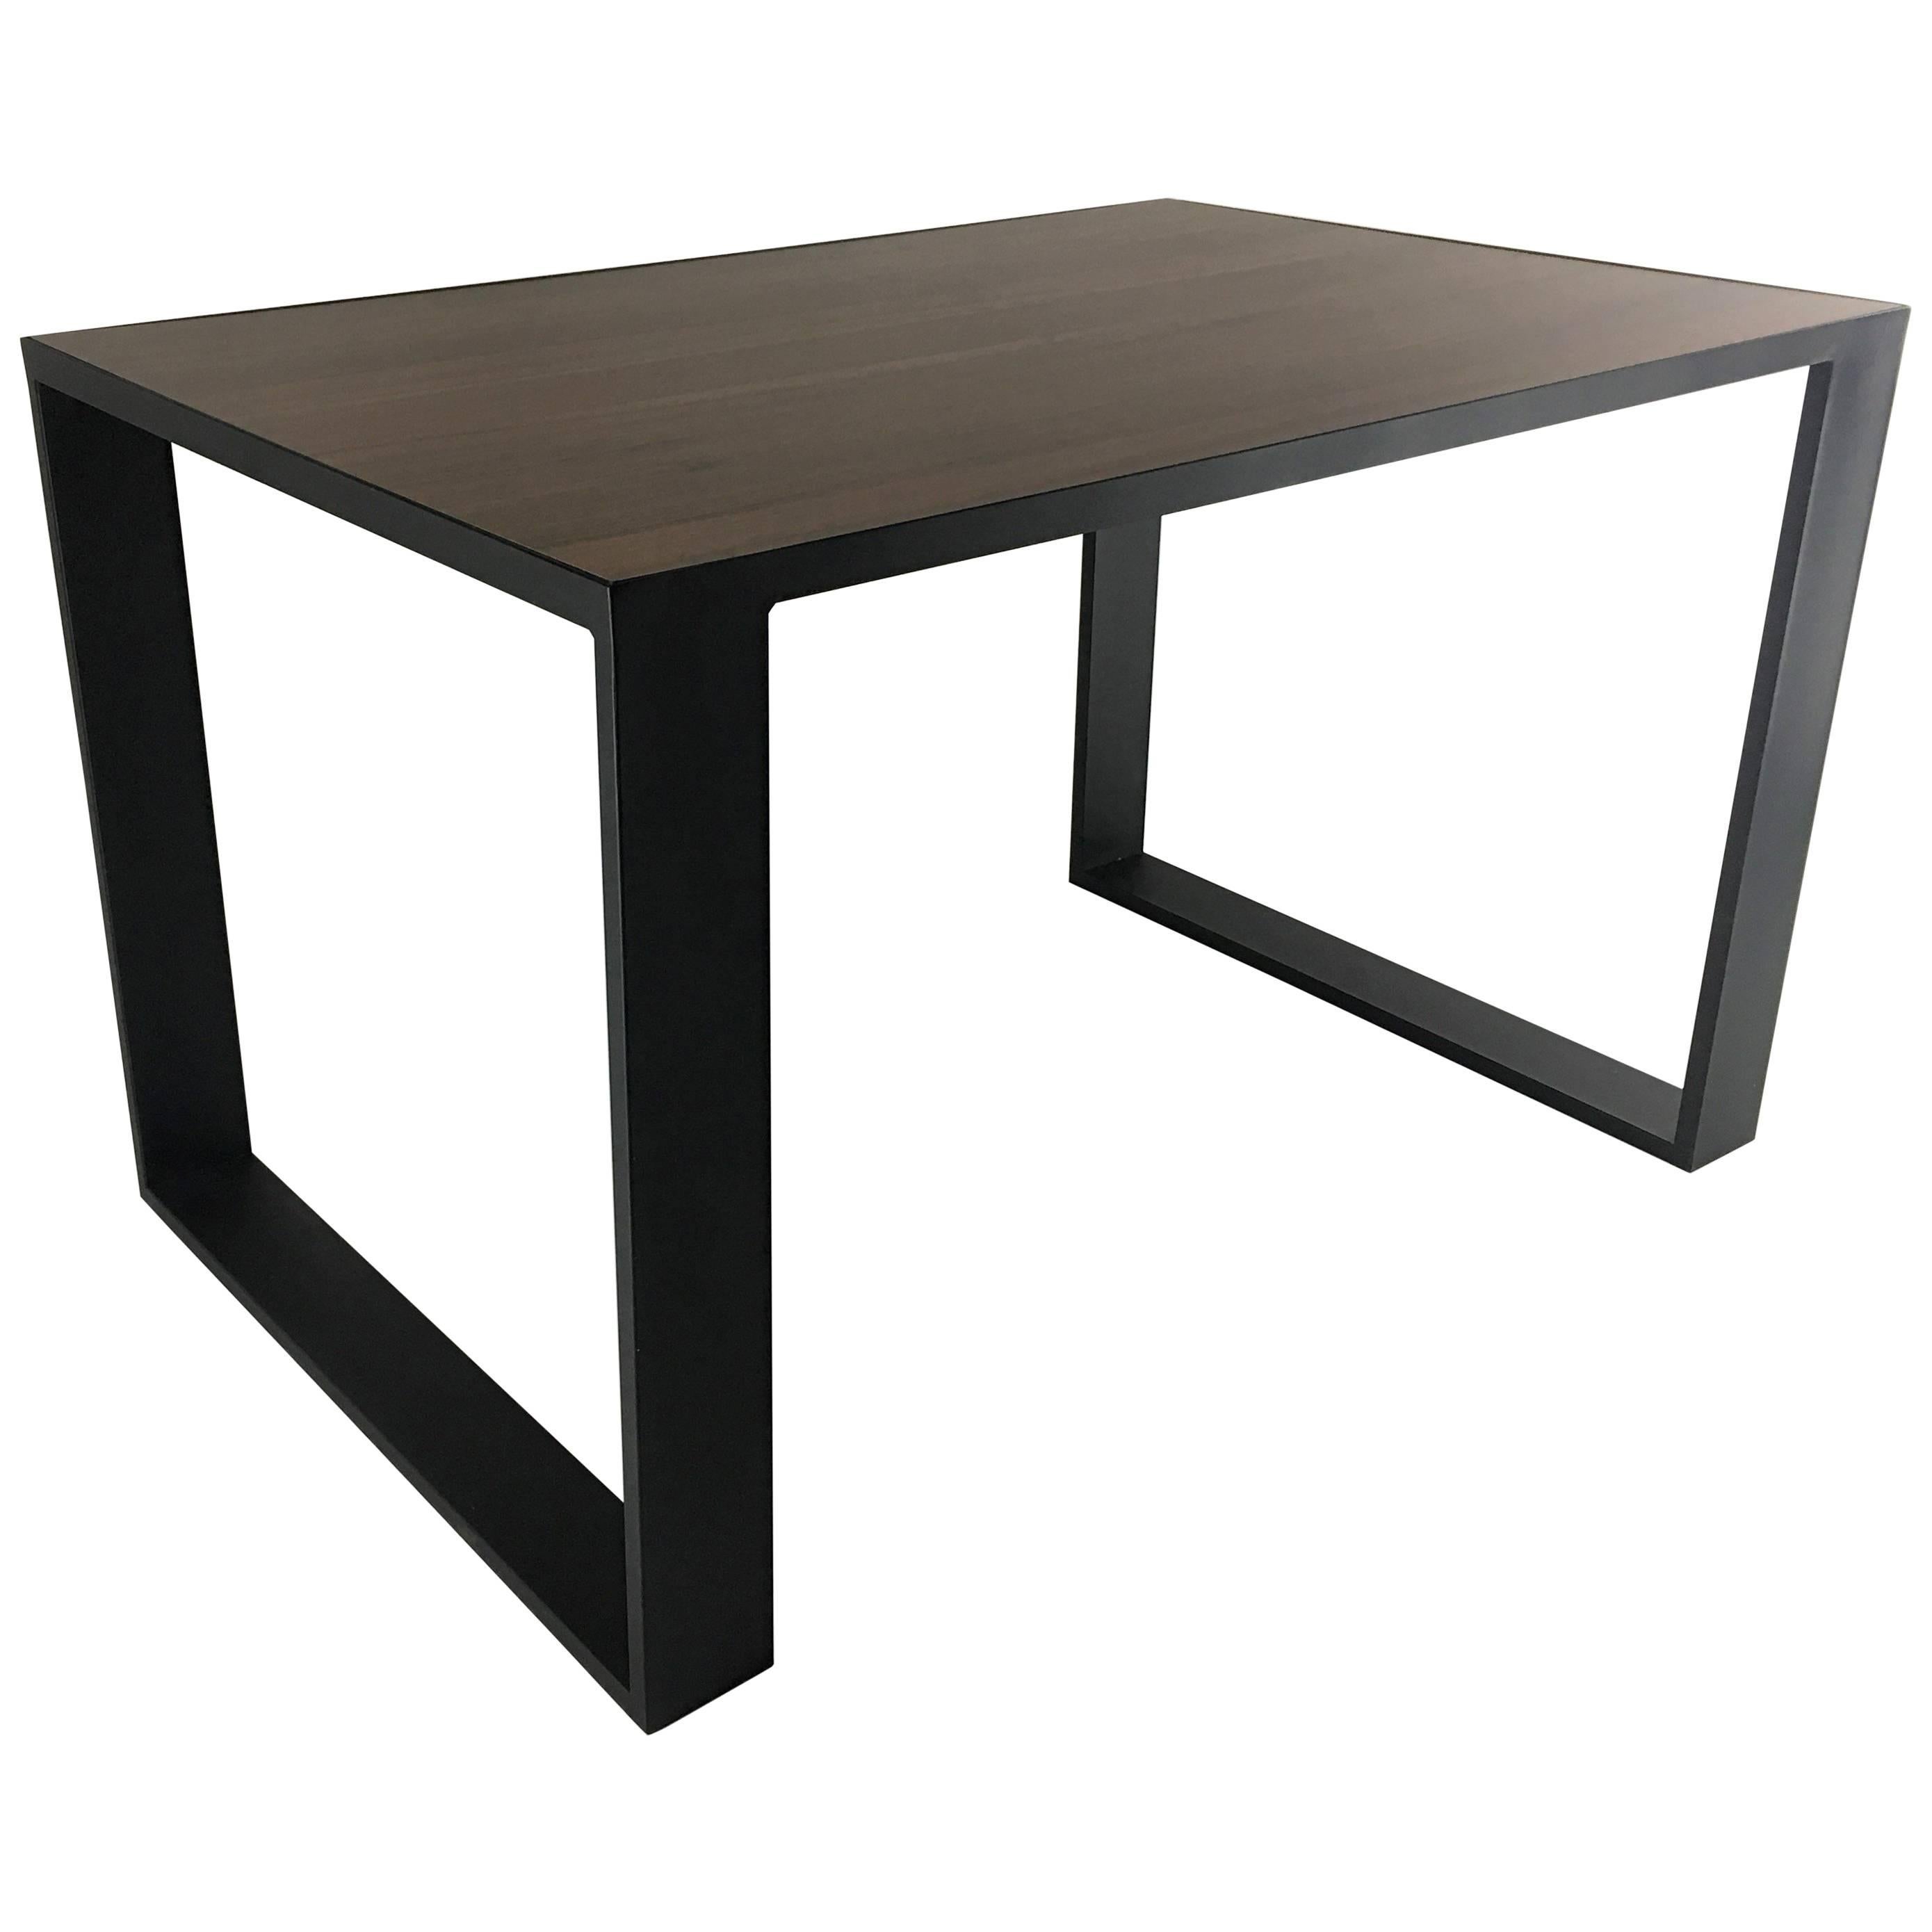 Rectangular Iron Cube Table with Embedded Wood Top, Dinner or Desk Table For Sale